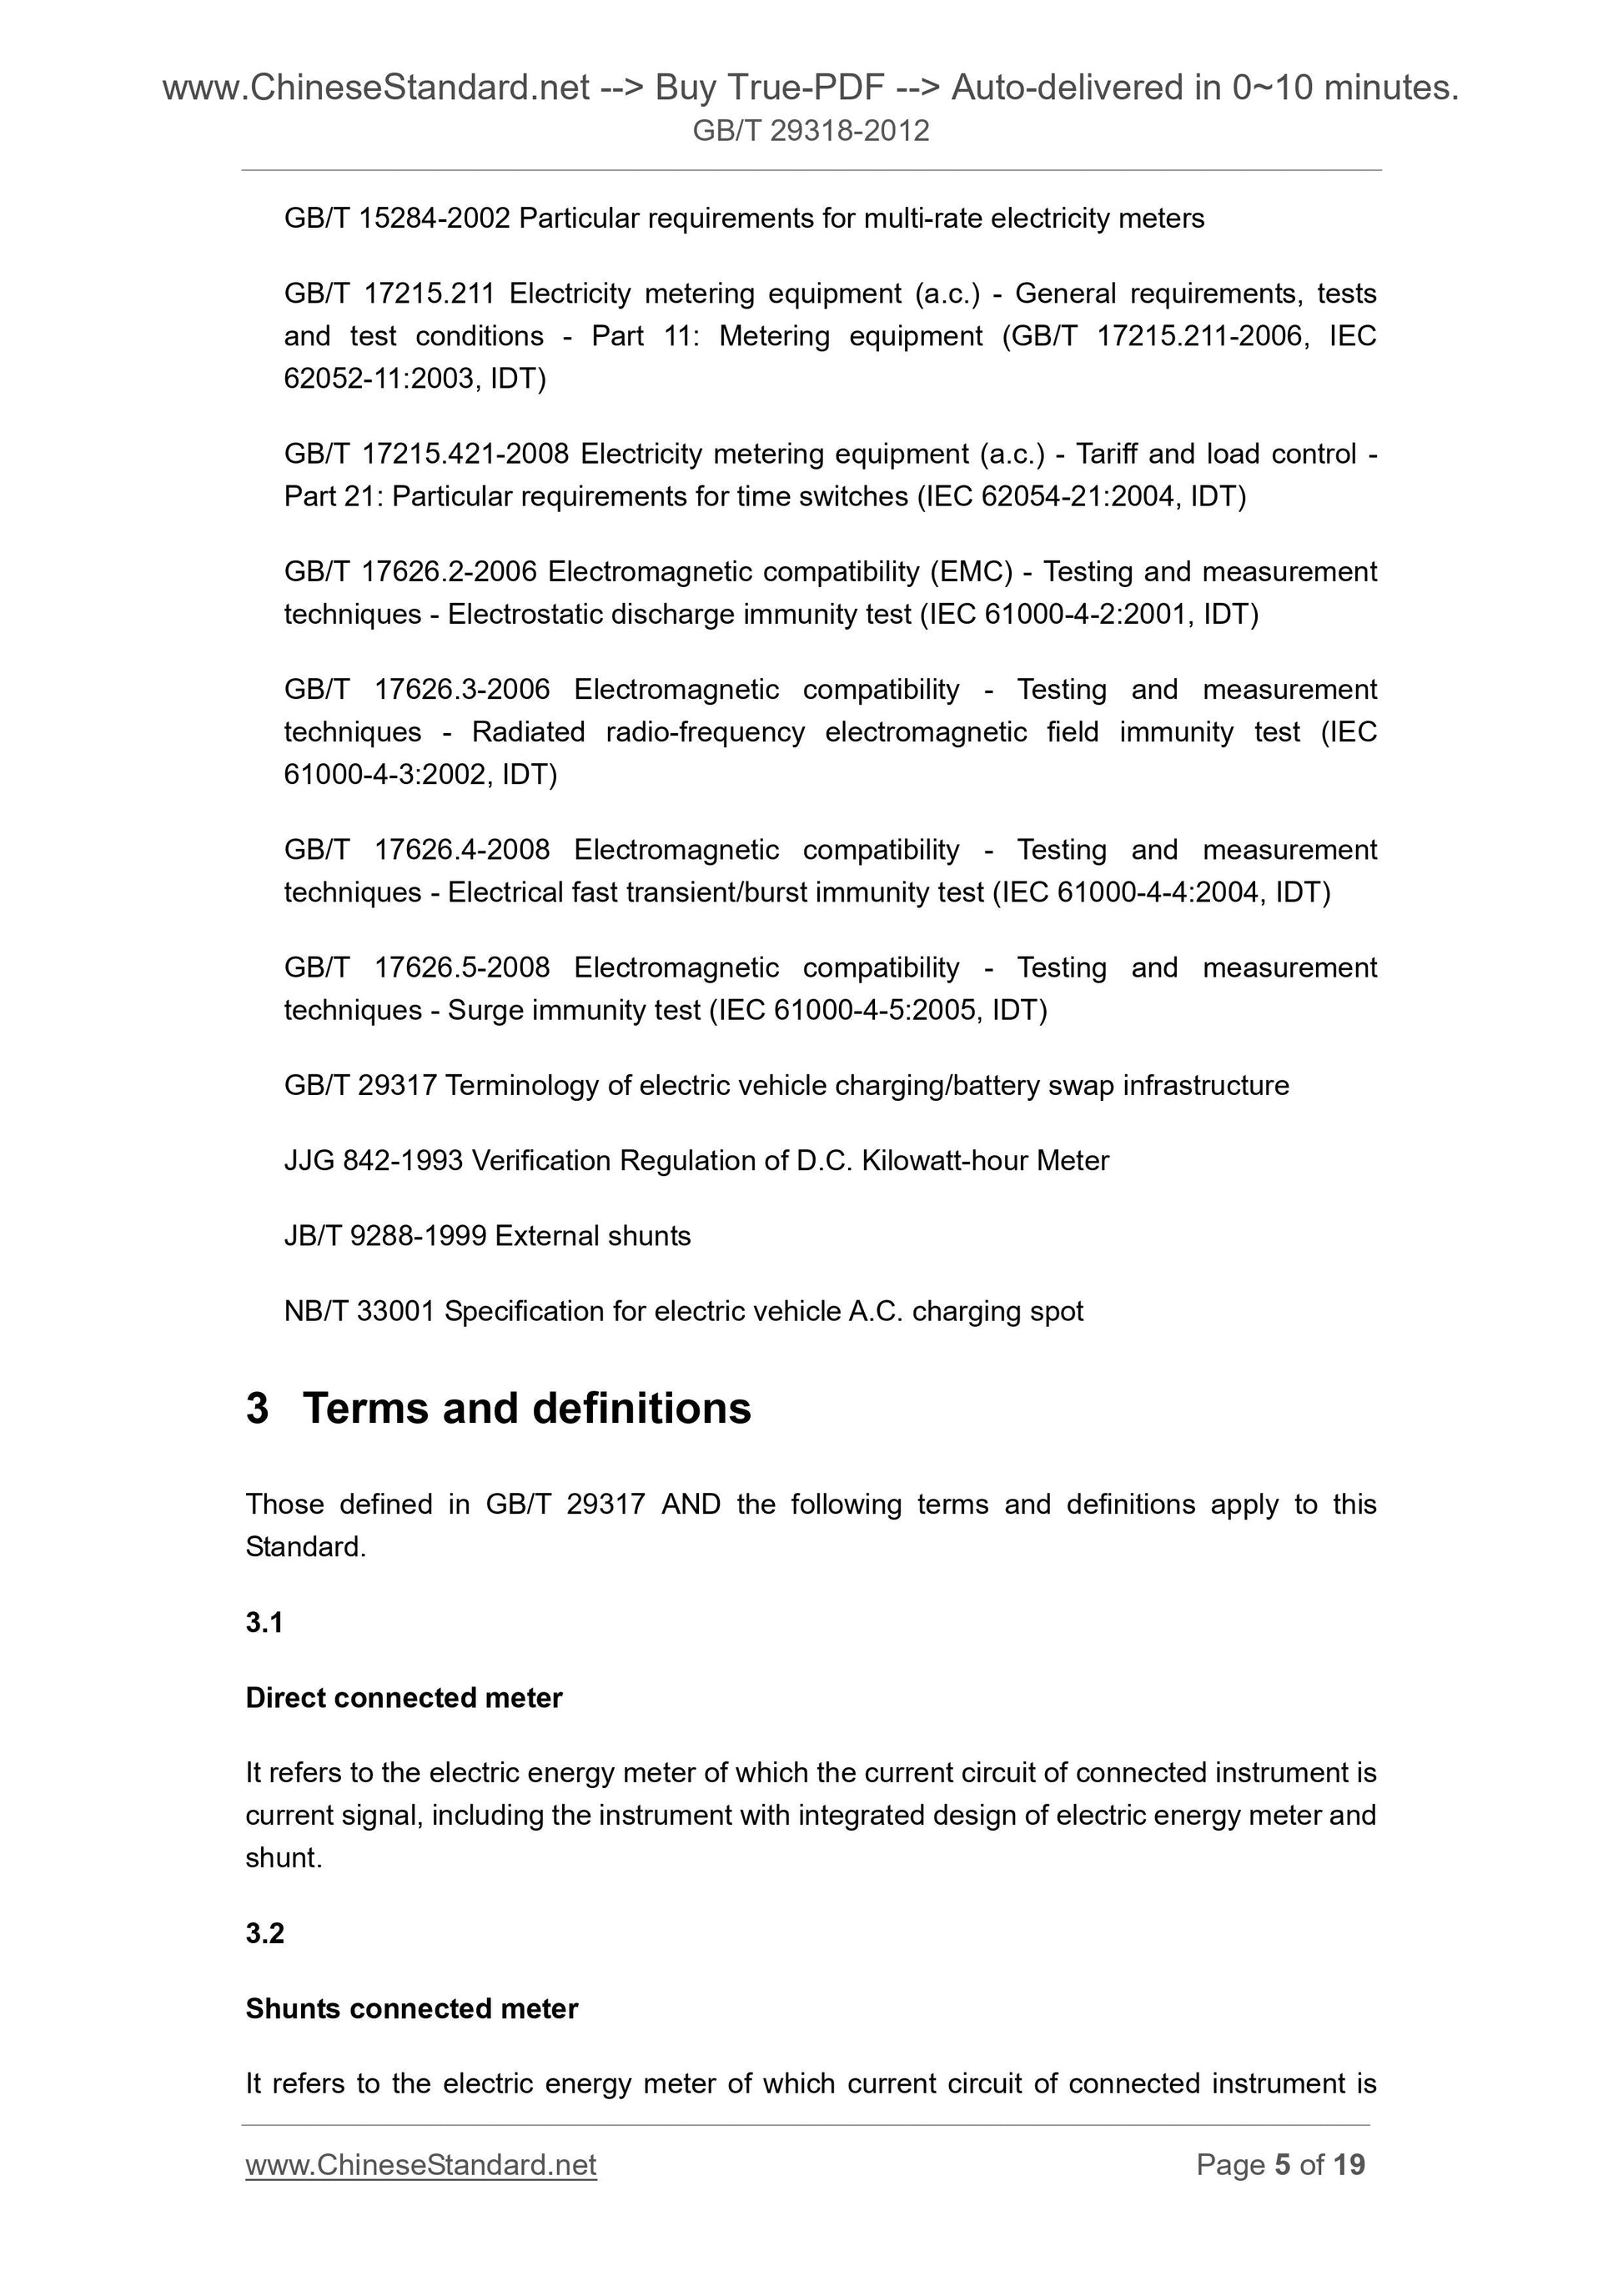 GB/T 29318-2012 Page 5